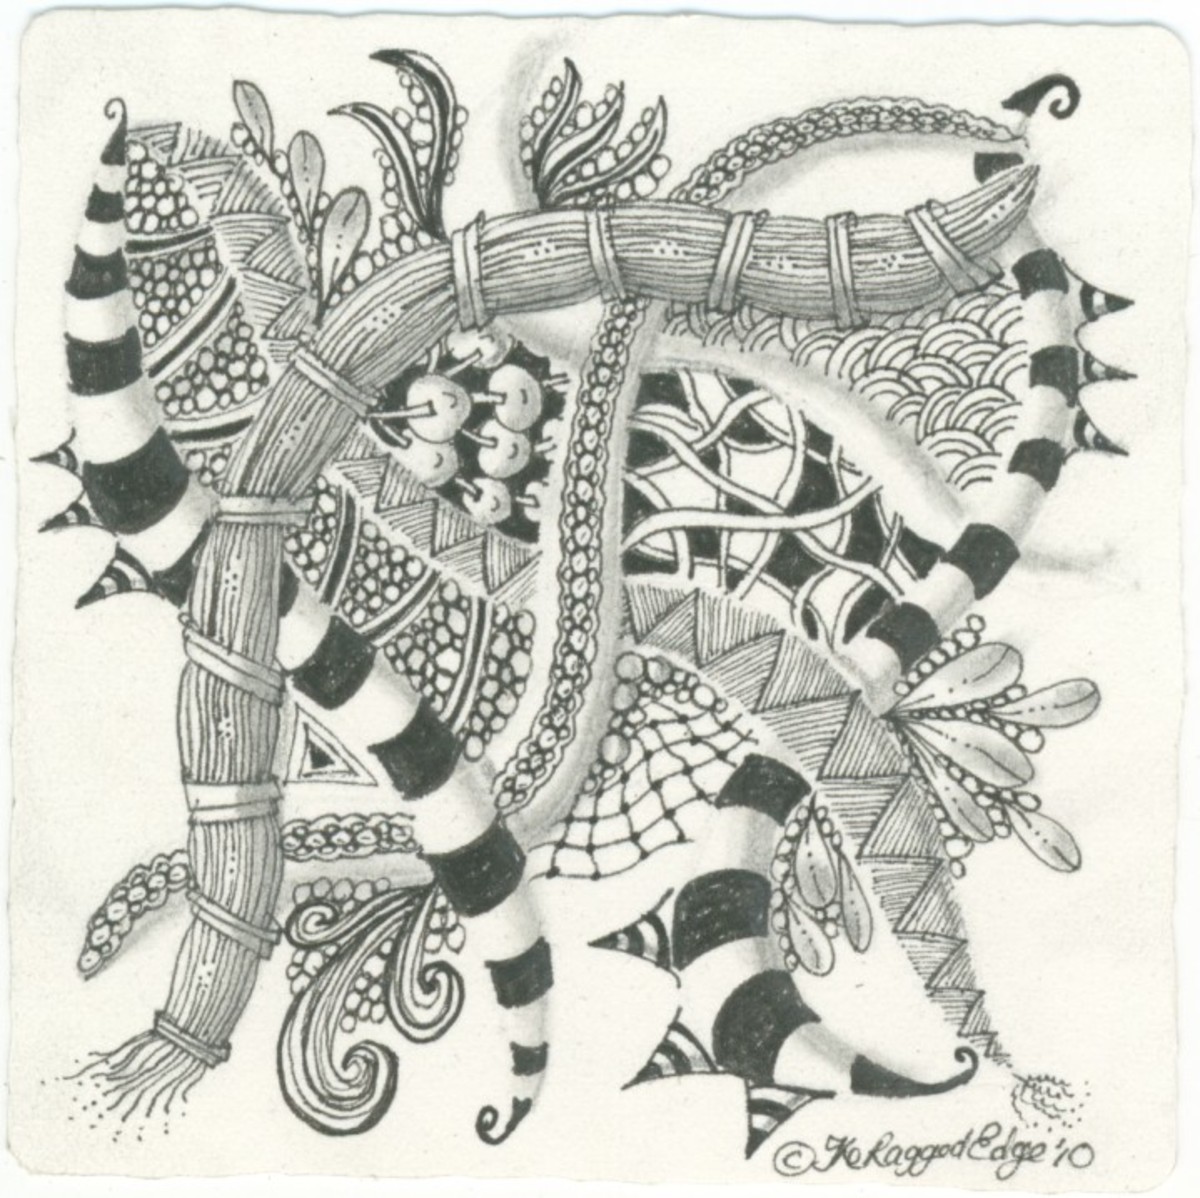 Drawing Your Way to Relaxation: How to Create a Zentangle or Zendoodle